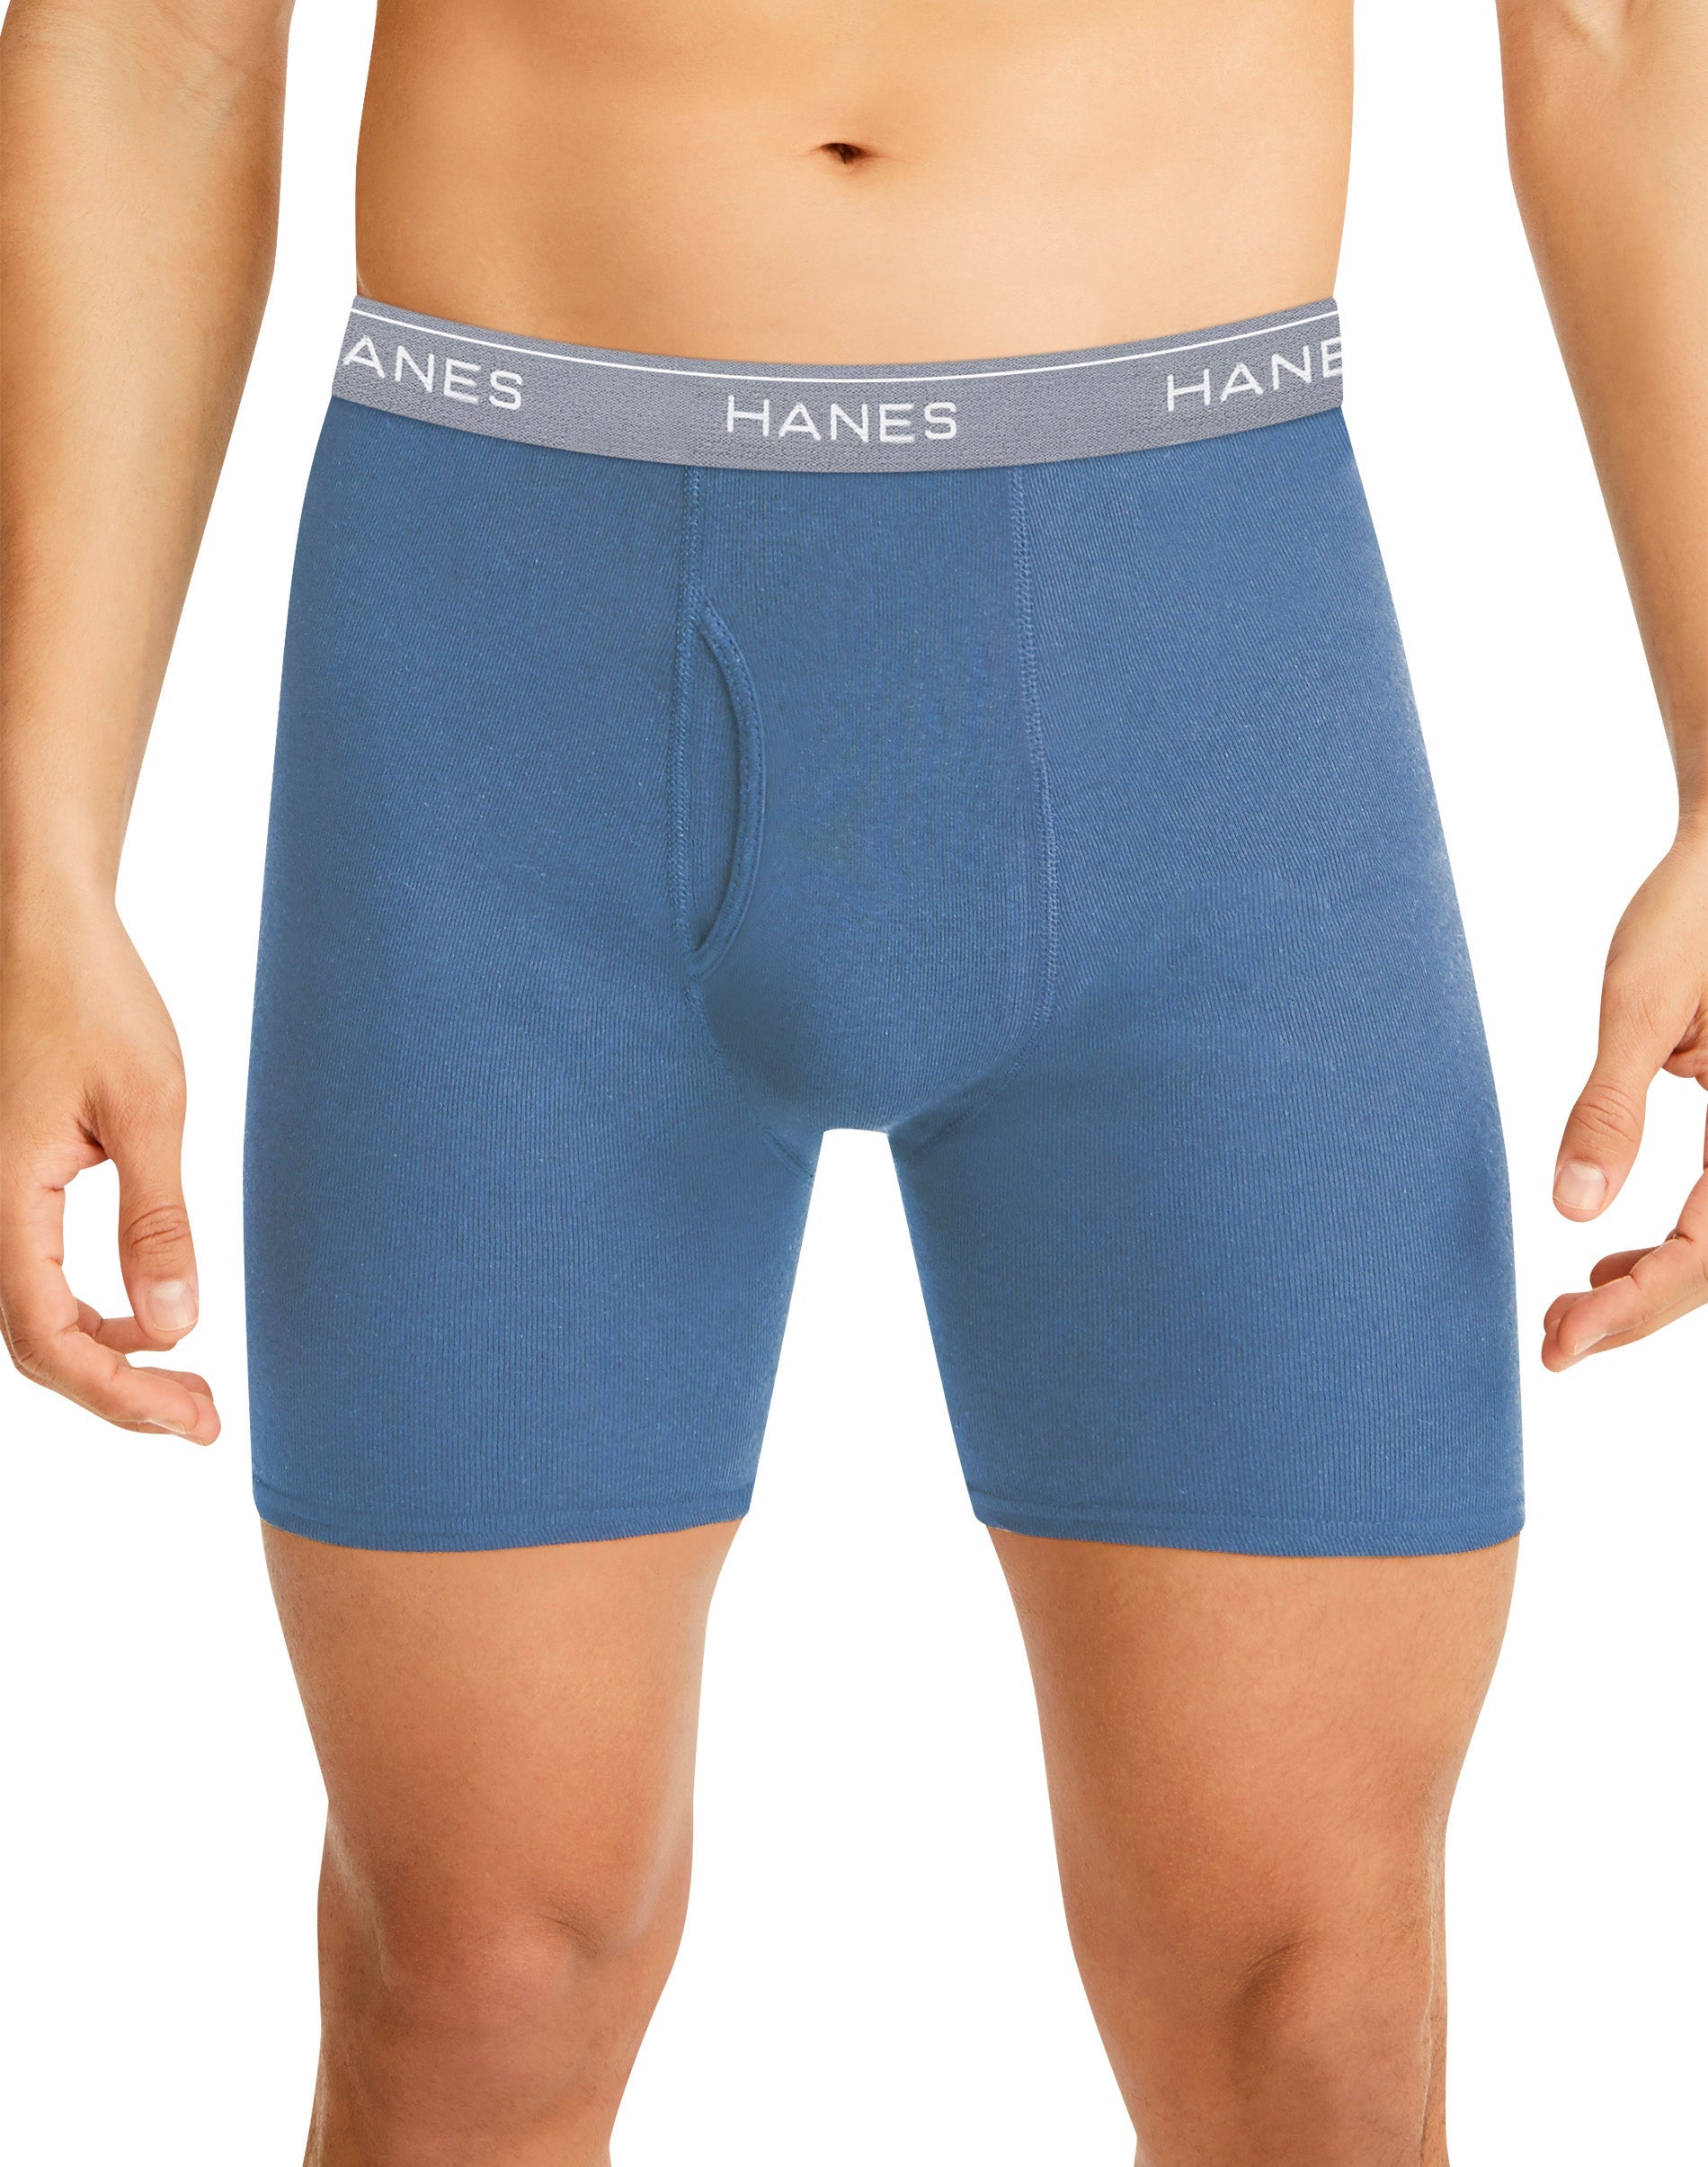 Hanes - Sport Styling, tagless boxer briefs, pk. of 3. Size: extra